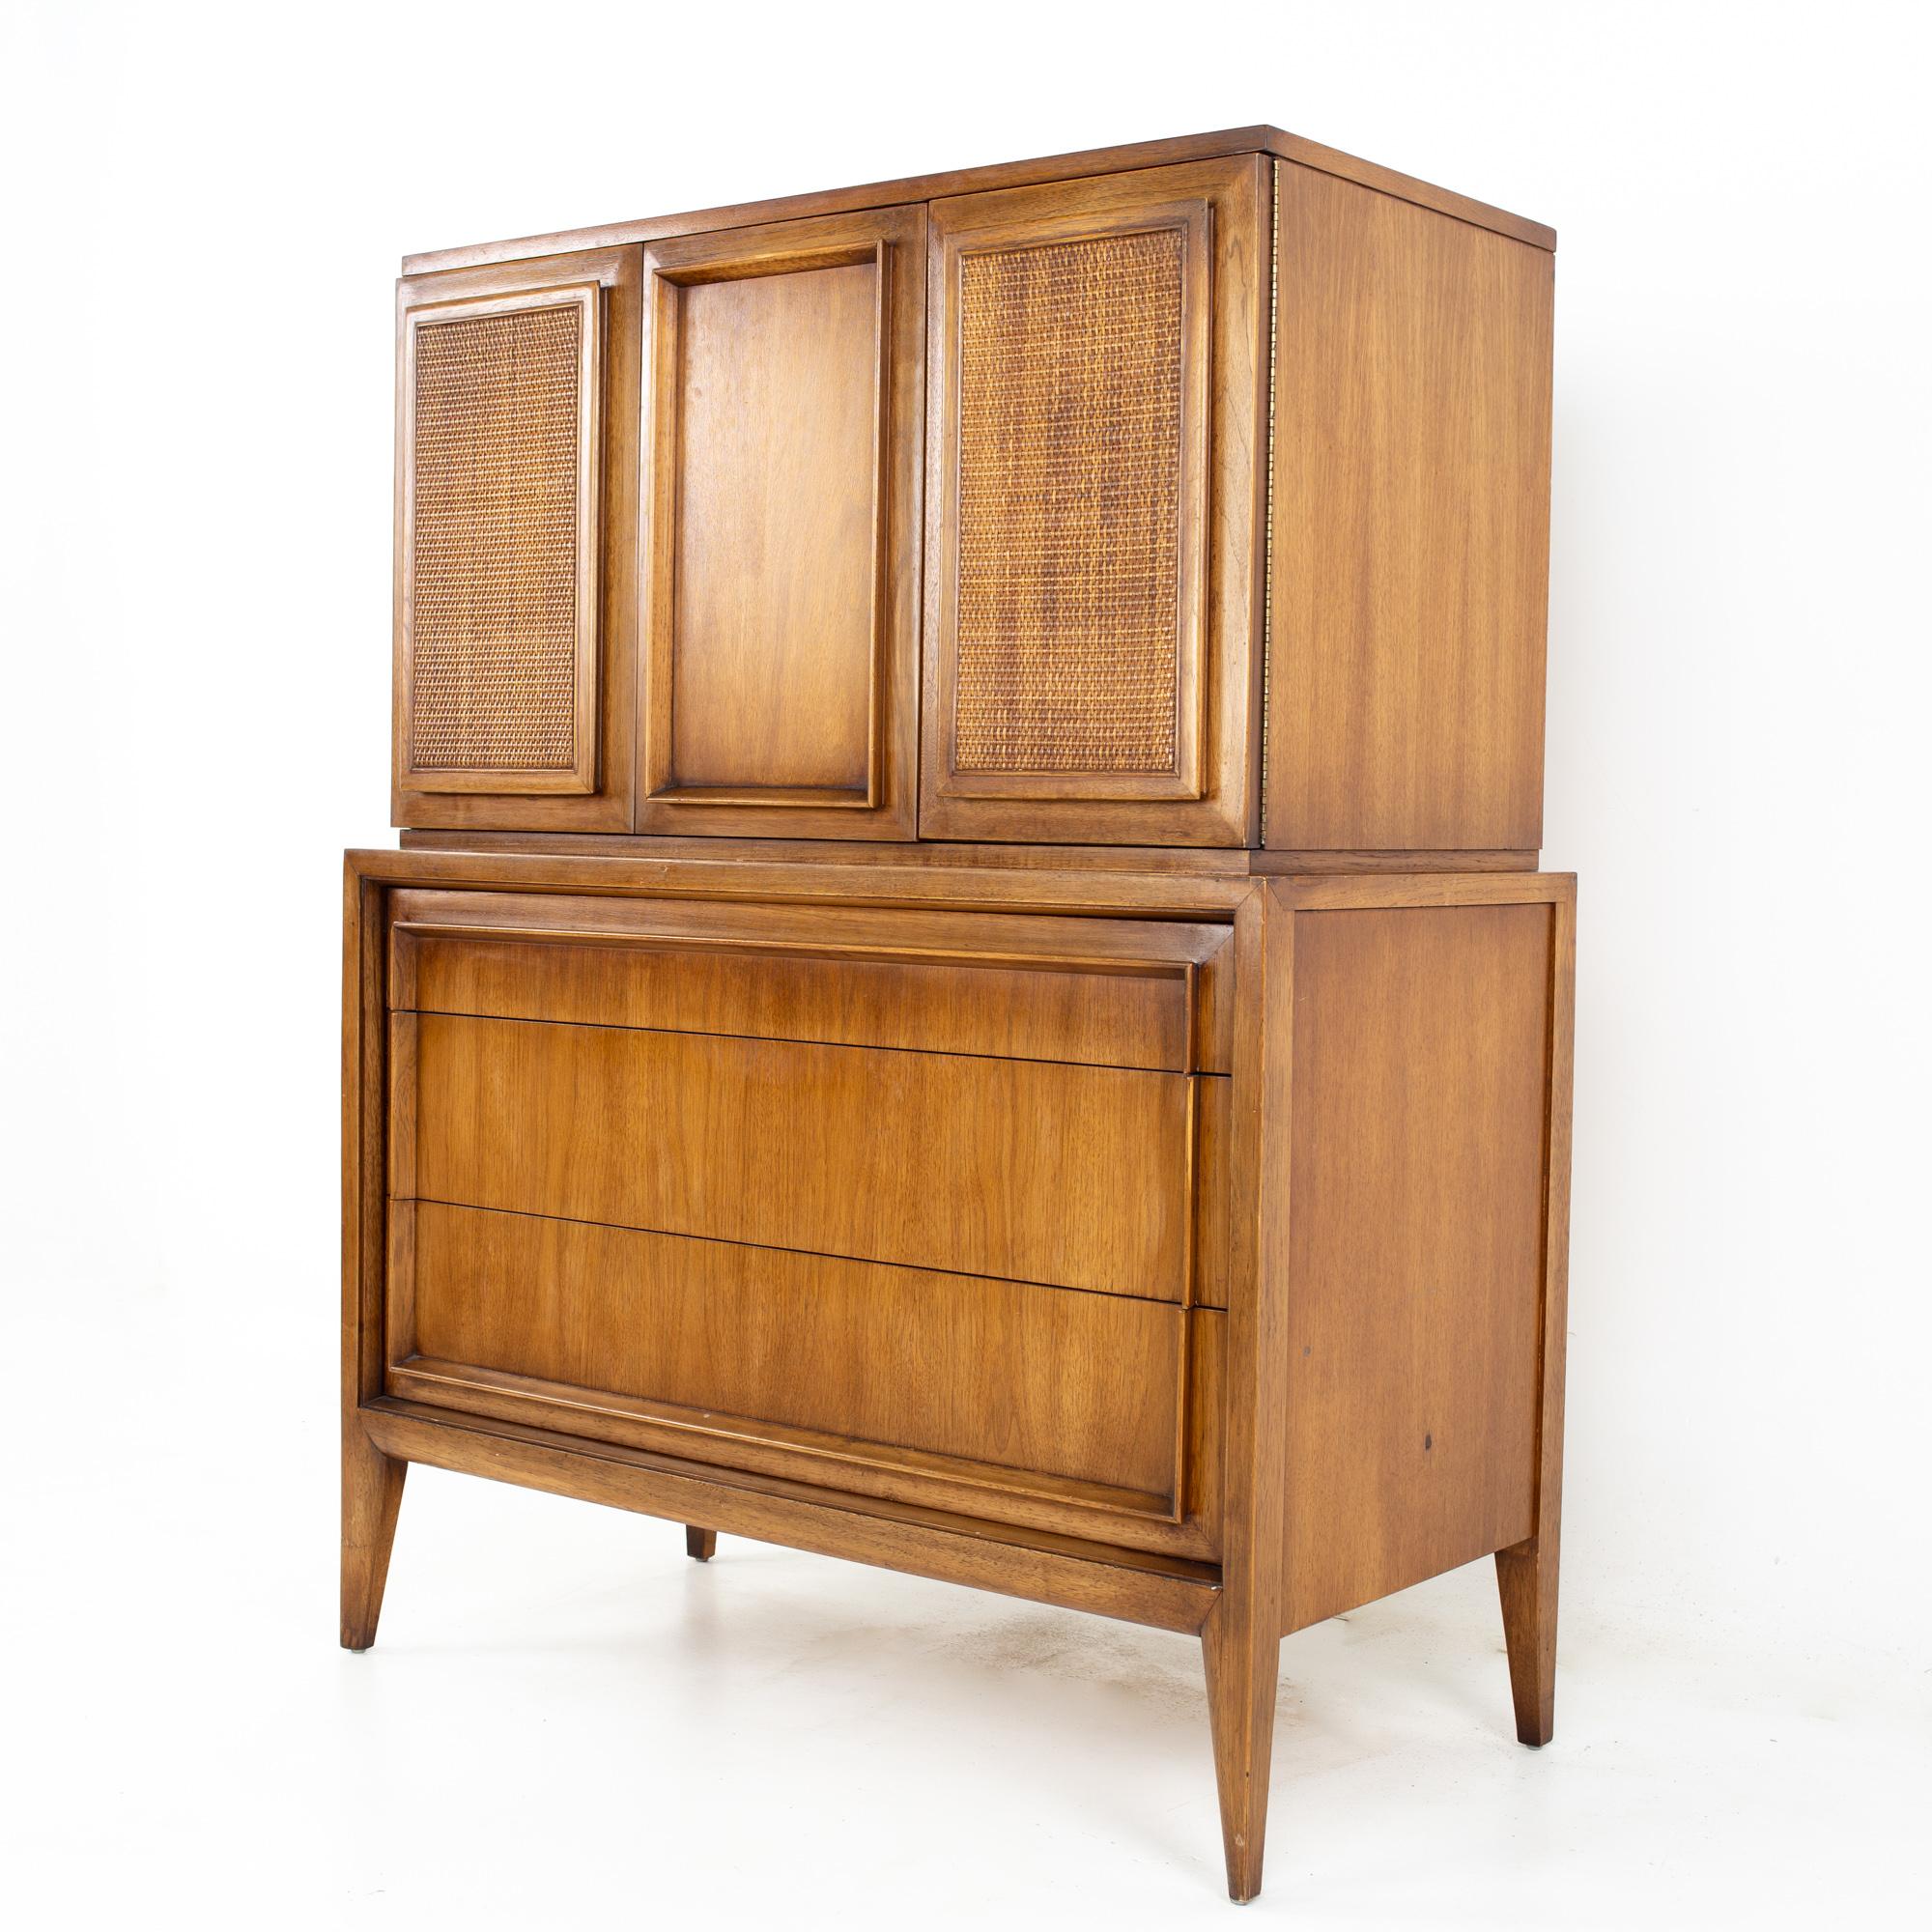 Century Furniture mid century walnut and cane highboy dresser armoire gentleman's chest
Gentleman's chest measures: 40 wide x 20 deep x 52.5 inches high

All pieces of furniture can be had in what we call restored vintage condition. That means